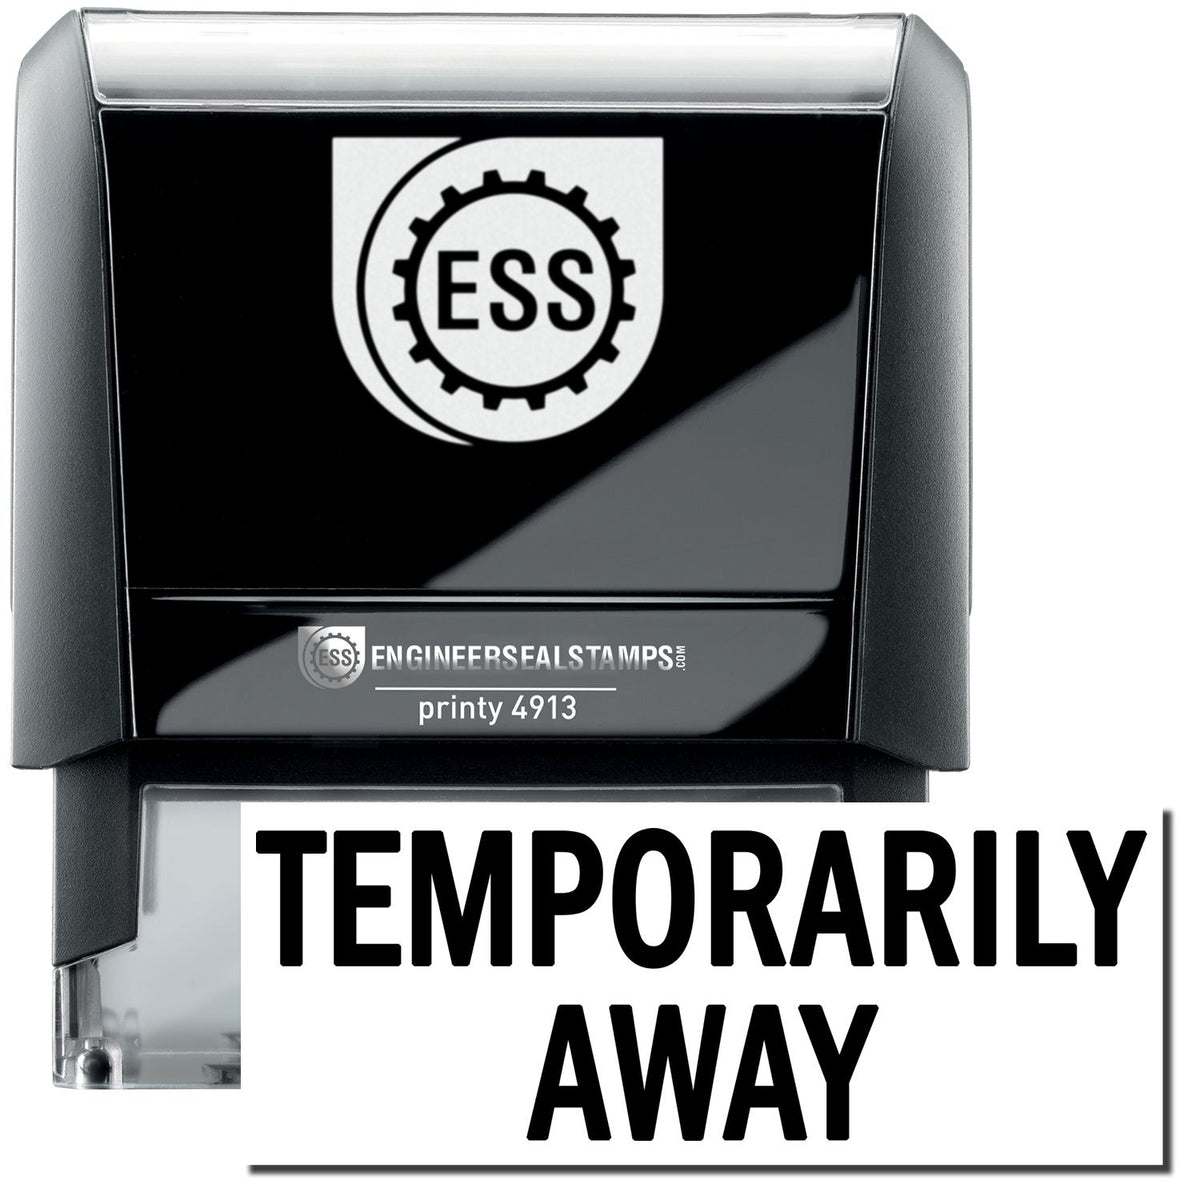 A self-inking stamp with a stamped image showing how the text &quot;TEMPORARILY AWAY&quot; in a large font is displayed by it after stamping.